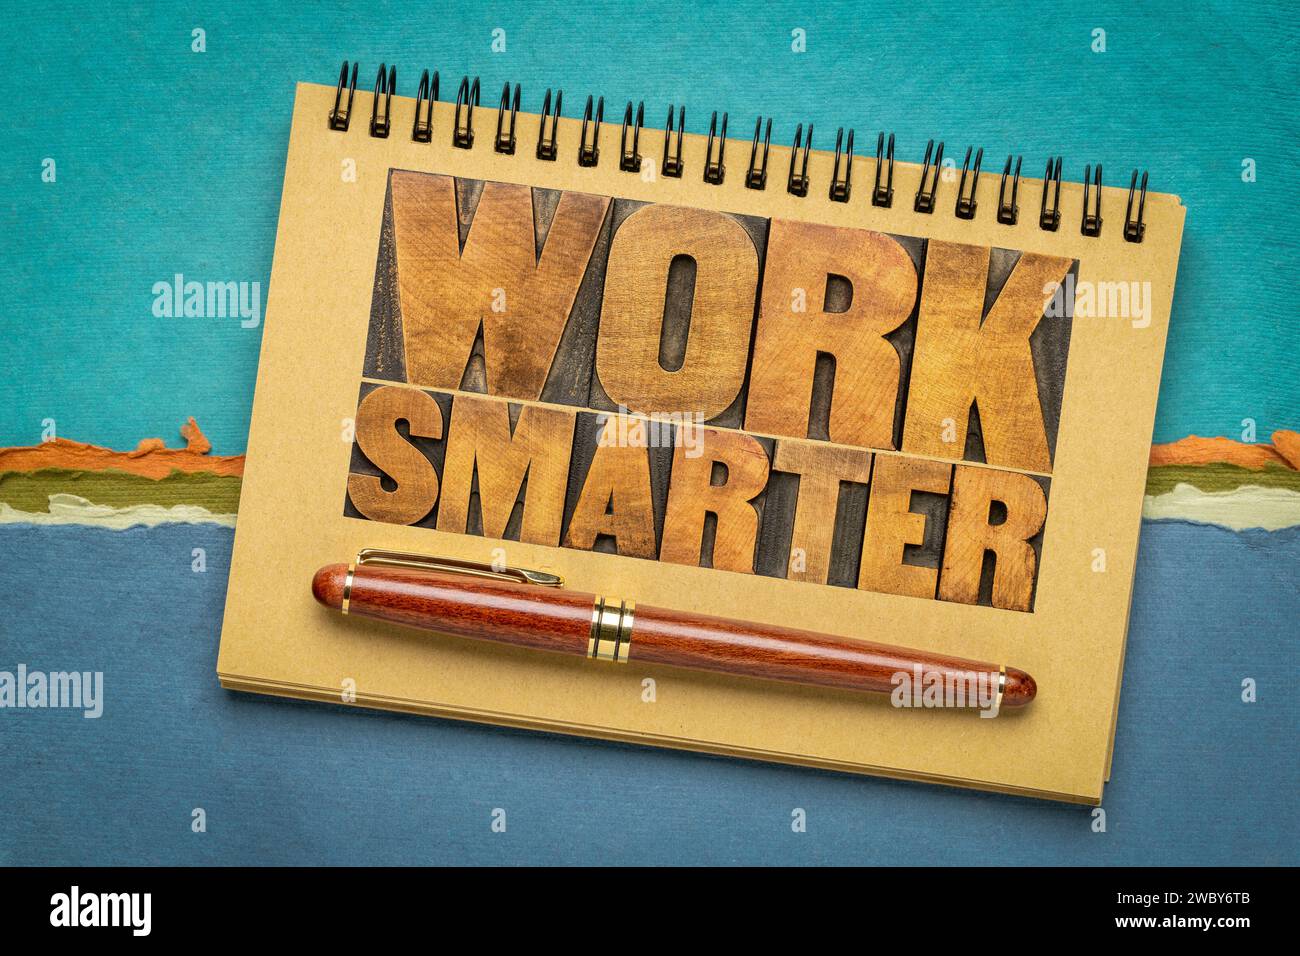 work smarter word abstract - motivational advice or reminder - text in letterpress wood type in a sketchbook, business productivity and efficiency con Stock Photo